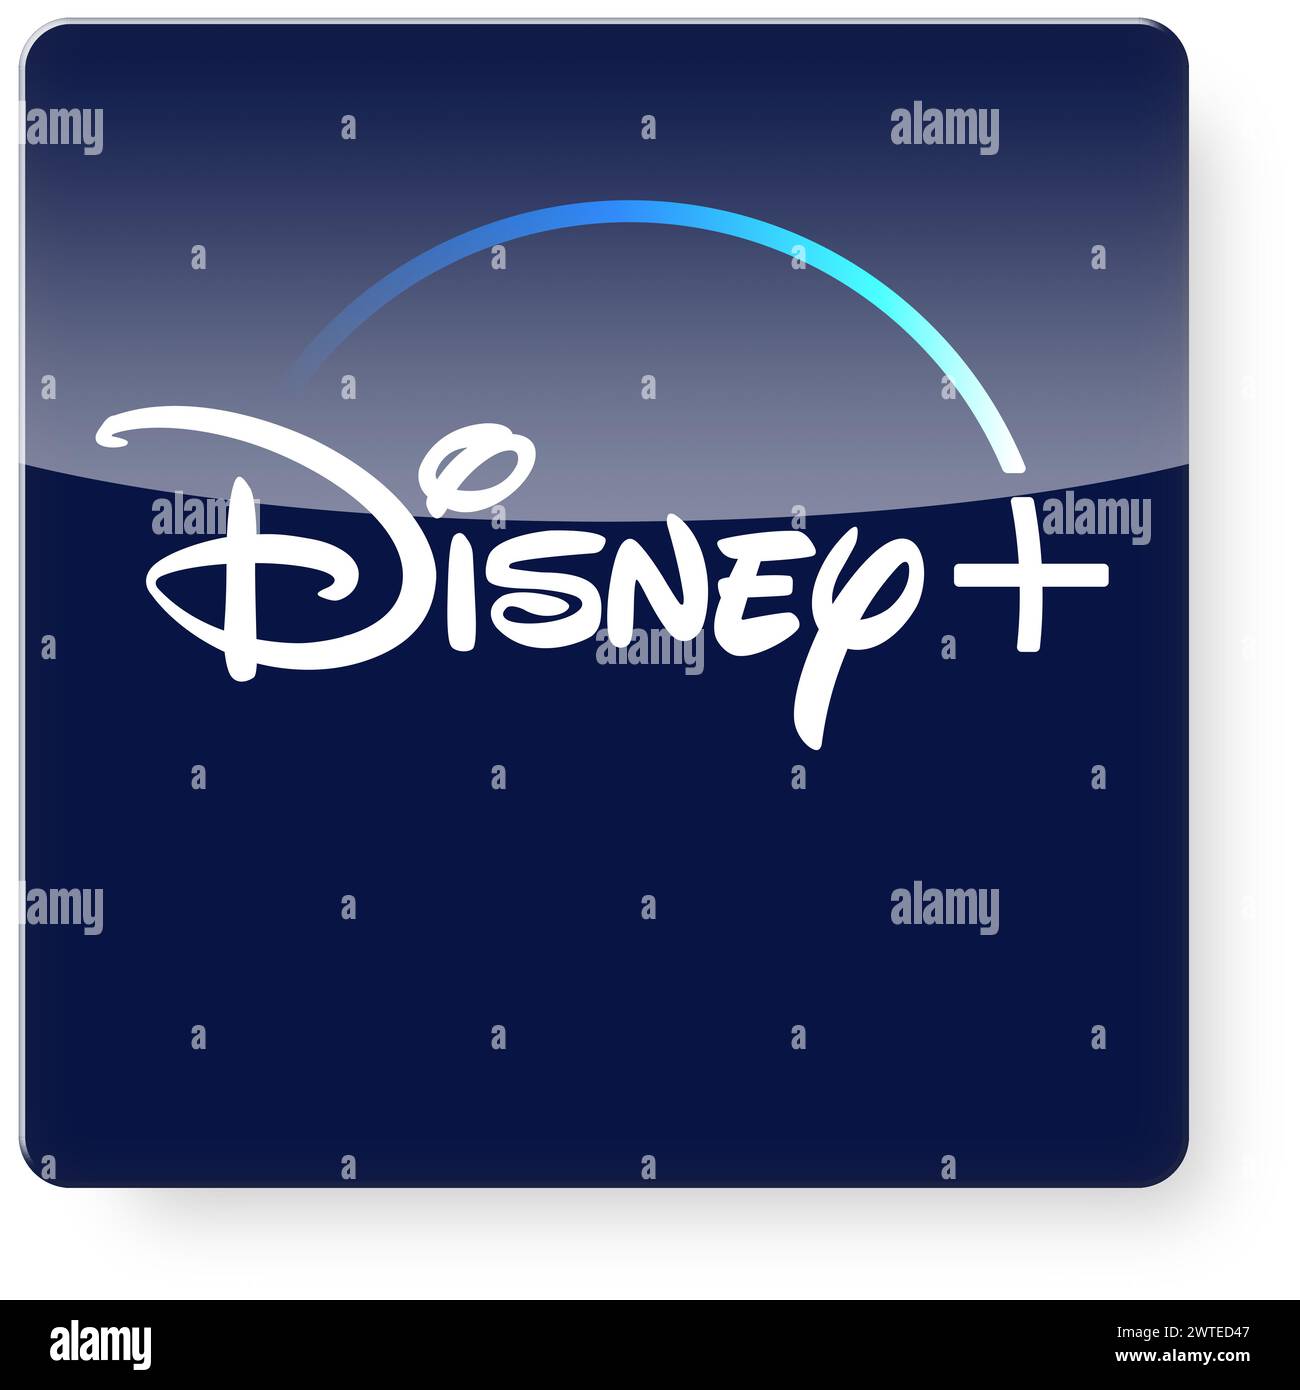 Disney+ logo as an app icon. Clipping path included. Stock Photo